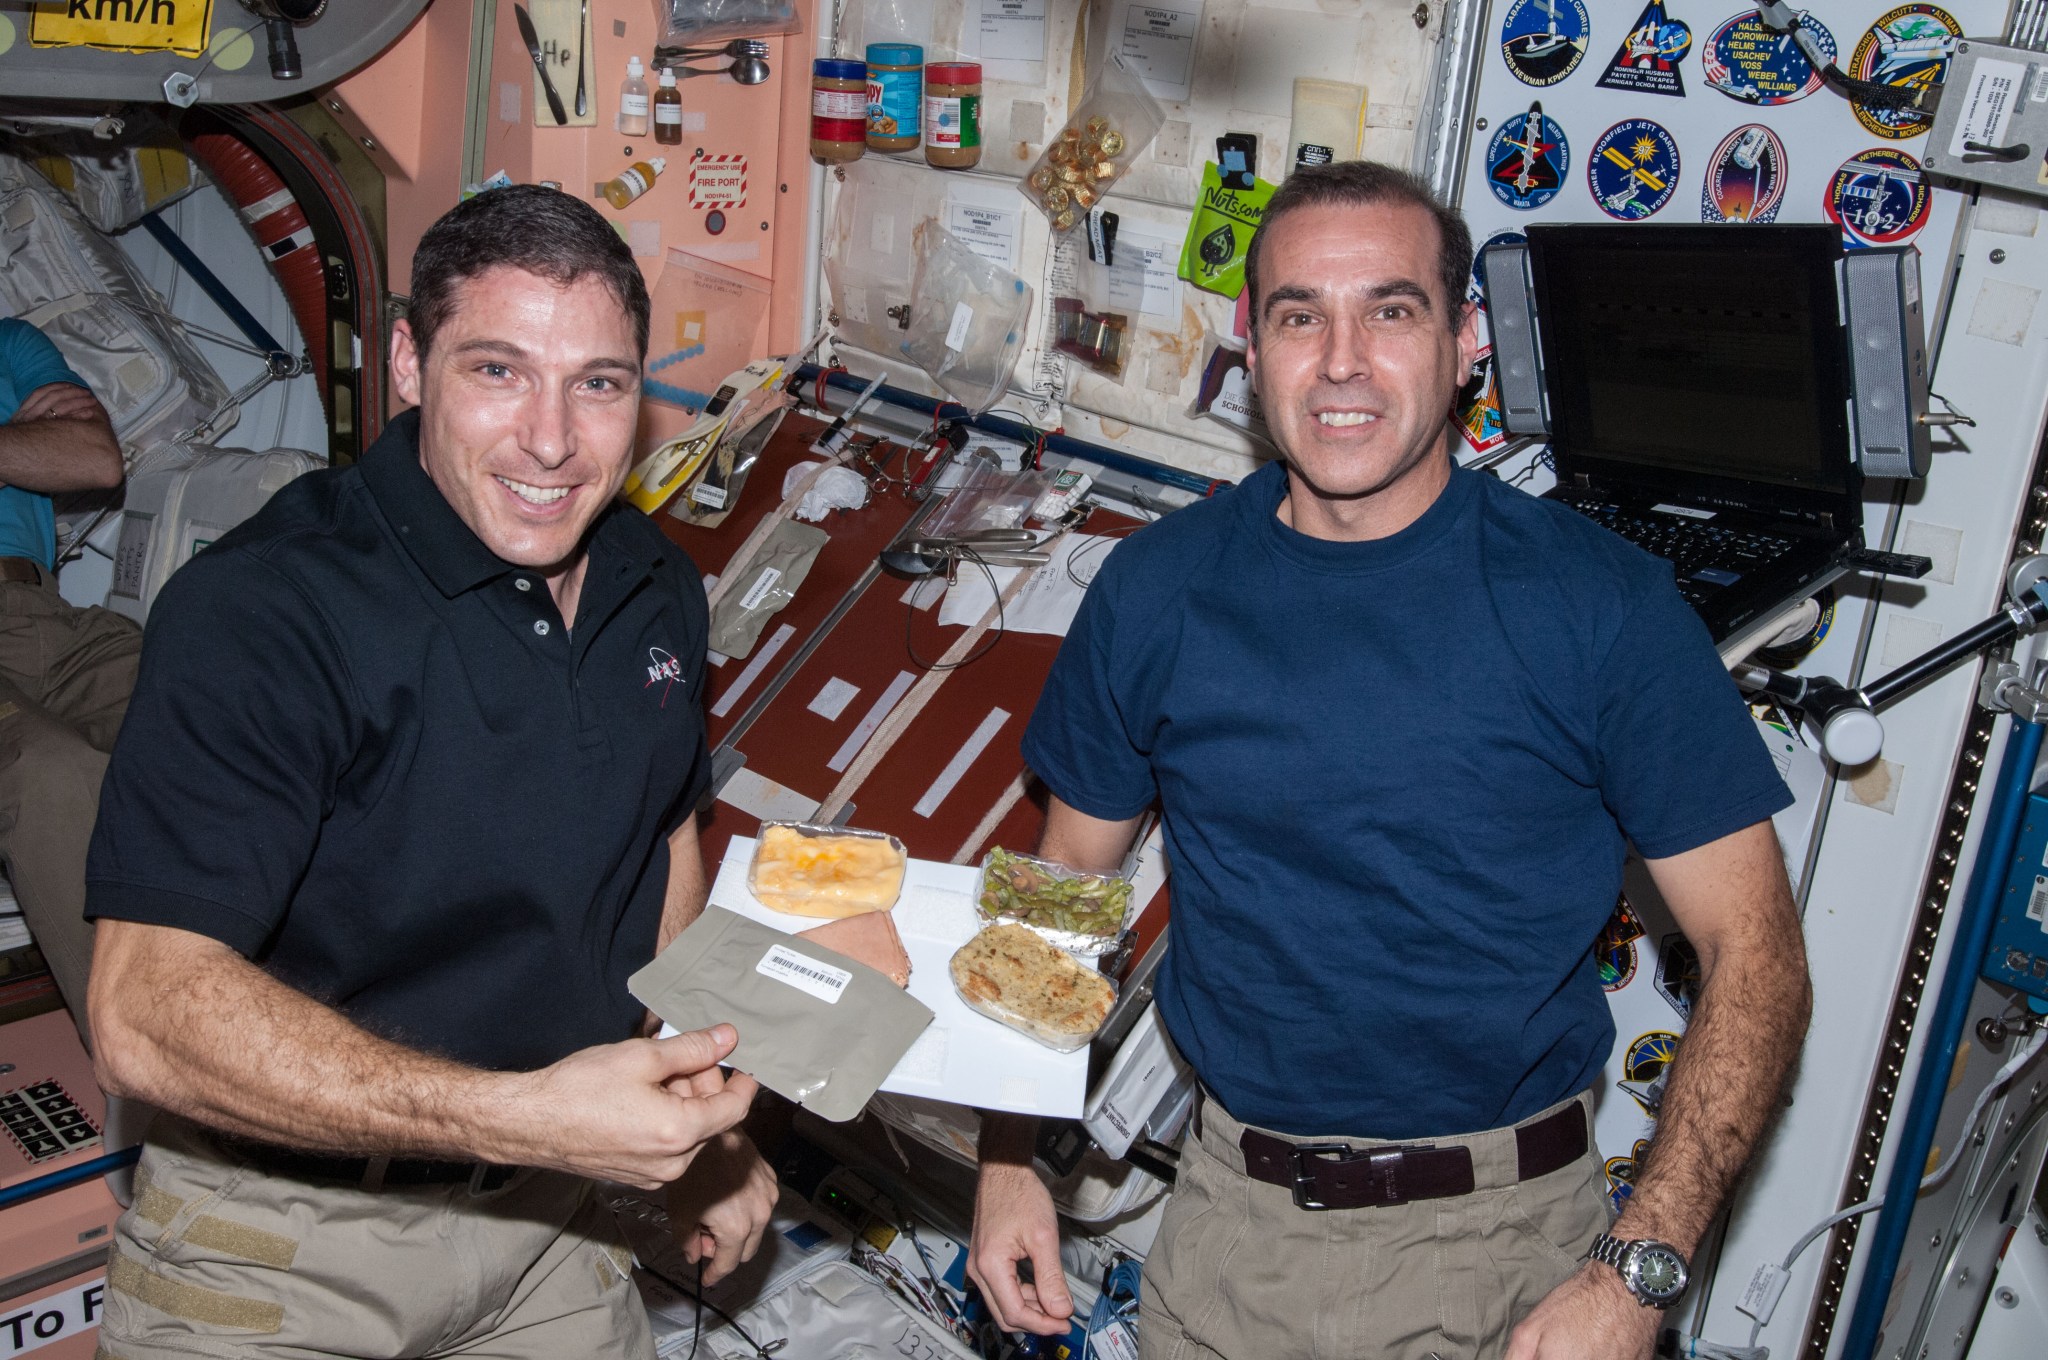 NASA astronauts Michael Hopkins (left) and Rick Mastracchio smile for the camera while aboard the International Space Station. Hopkins holds a thin white sheet with Velcro on it, which secures the Thanksgiving foods shown, including green beans, smoked turkey, and stuffing.